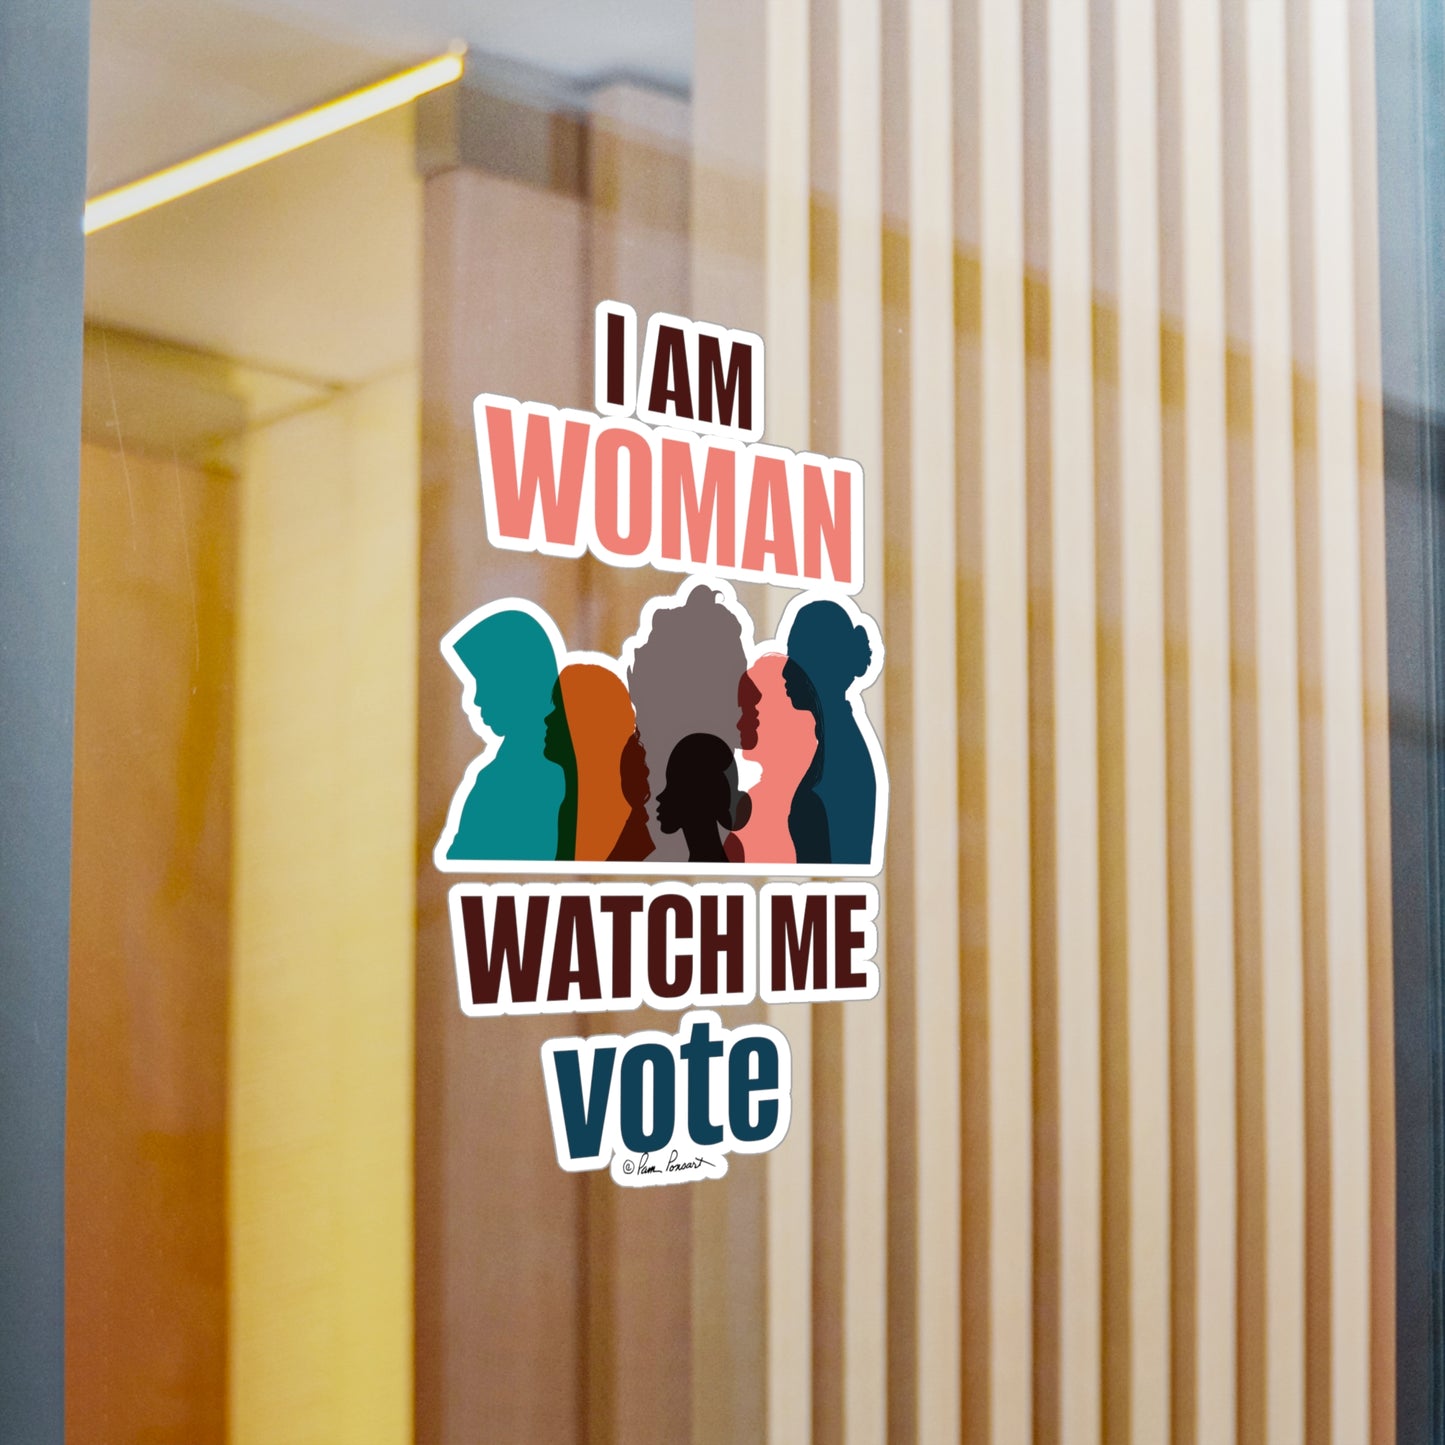 A removable adhesive Voting Women's Decal on a glass door with the text "i am woman watch me vote" surrounded by silhouettes of diverse women's profiles, crafted from white vinyl by Printify.